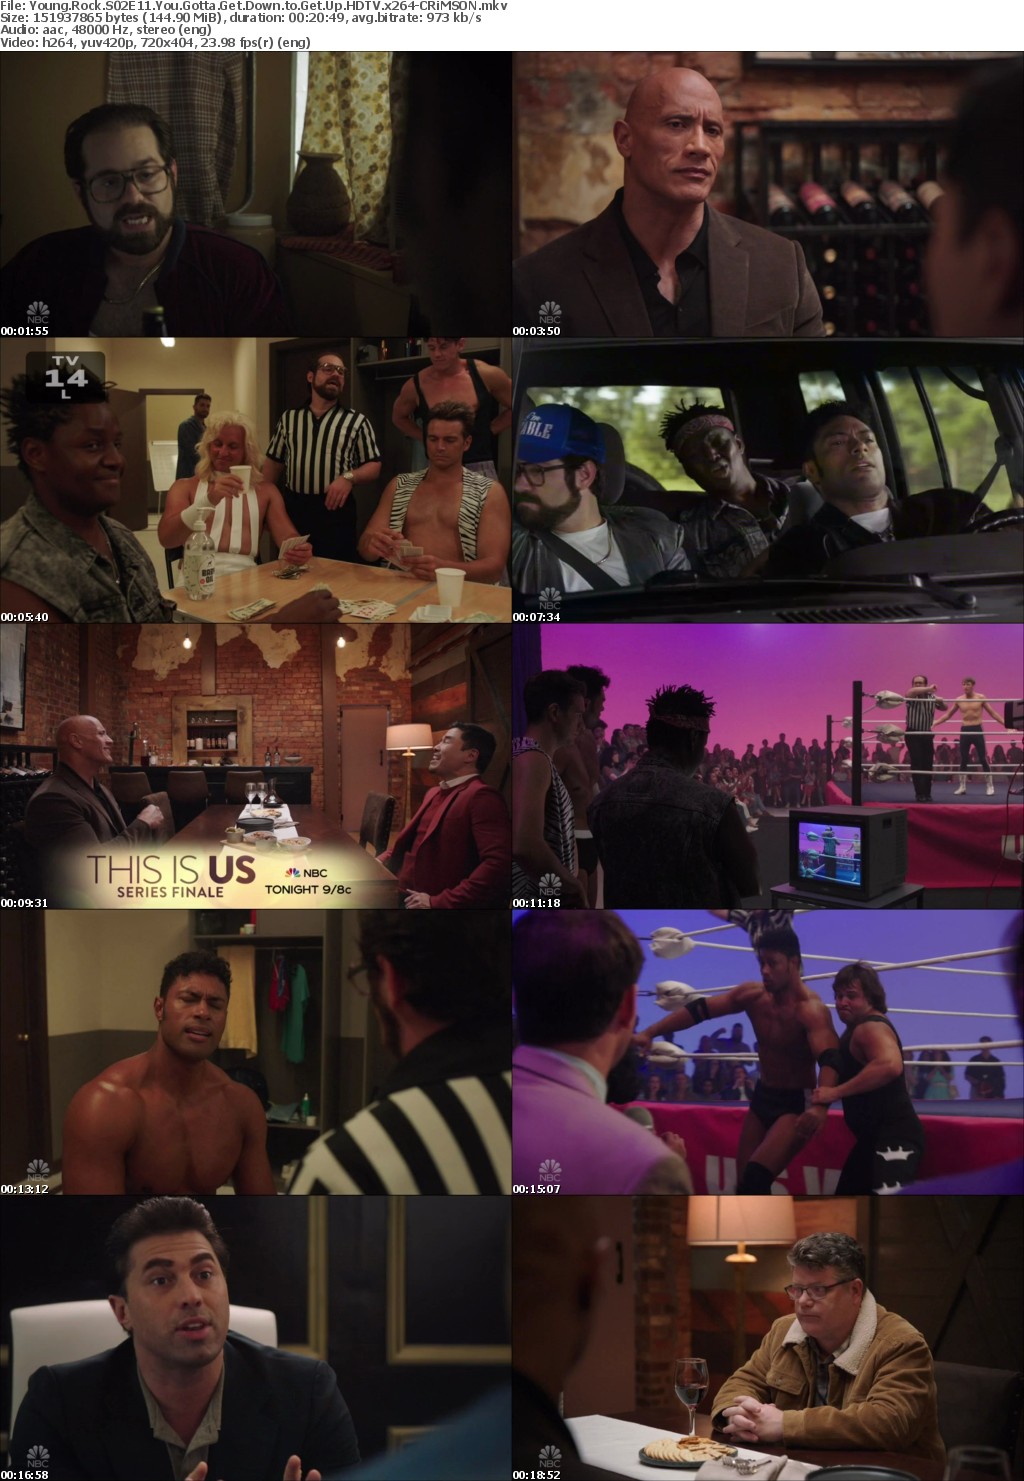 Young Rock S02E11 You Gotta Get Down to Get Up HDTV x264-CRiMSON